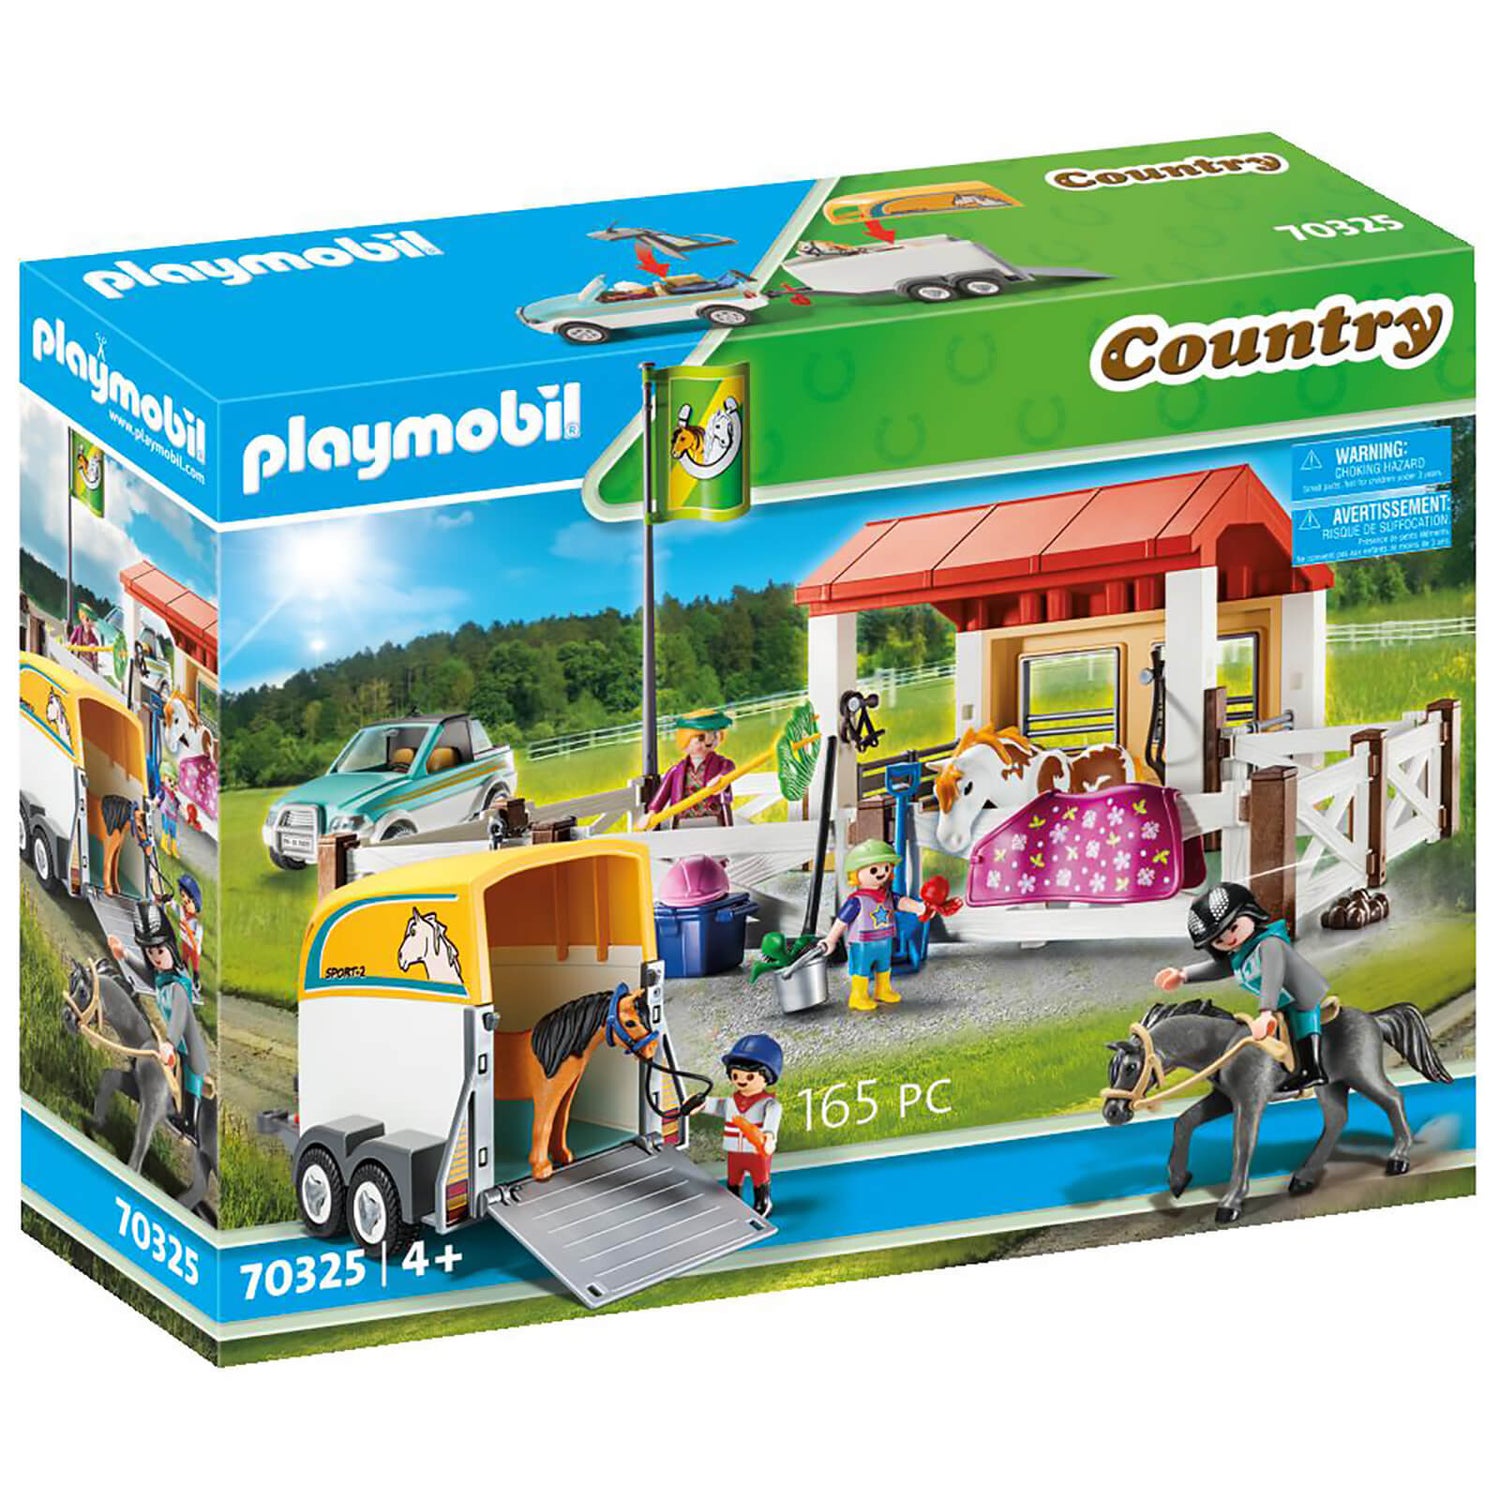 Playmobil Country Sets